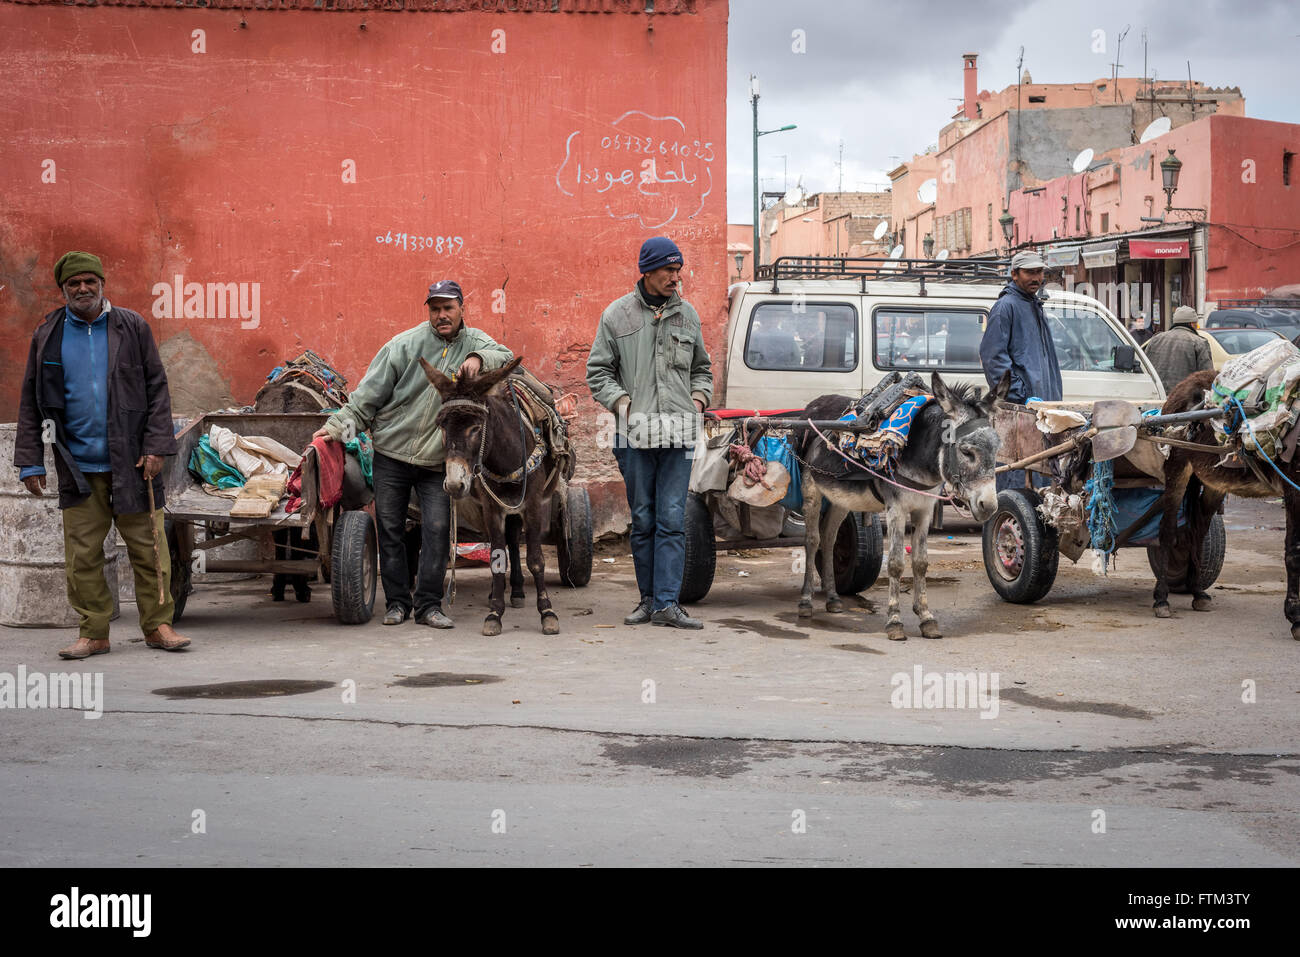 Donkeys for hire as beasts of burden, with their owners on a busy street in Marrakech. Stock Photo